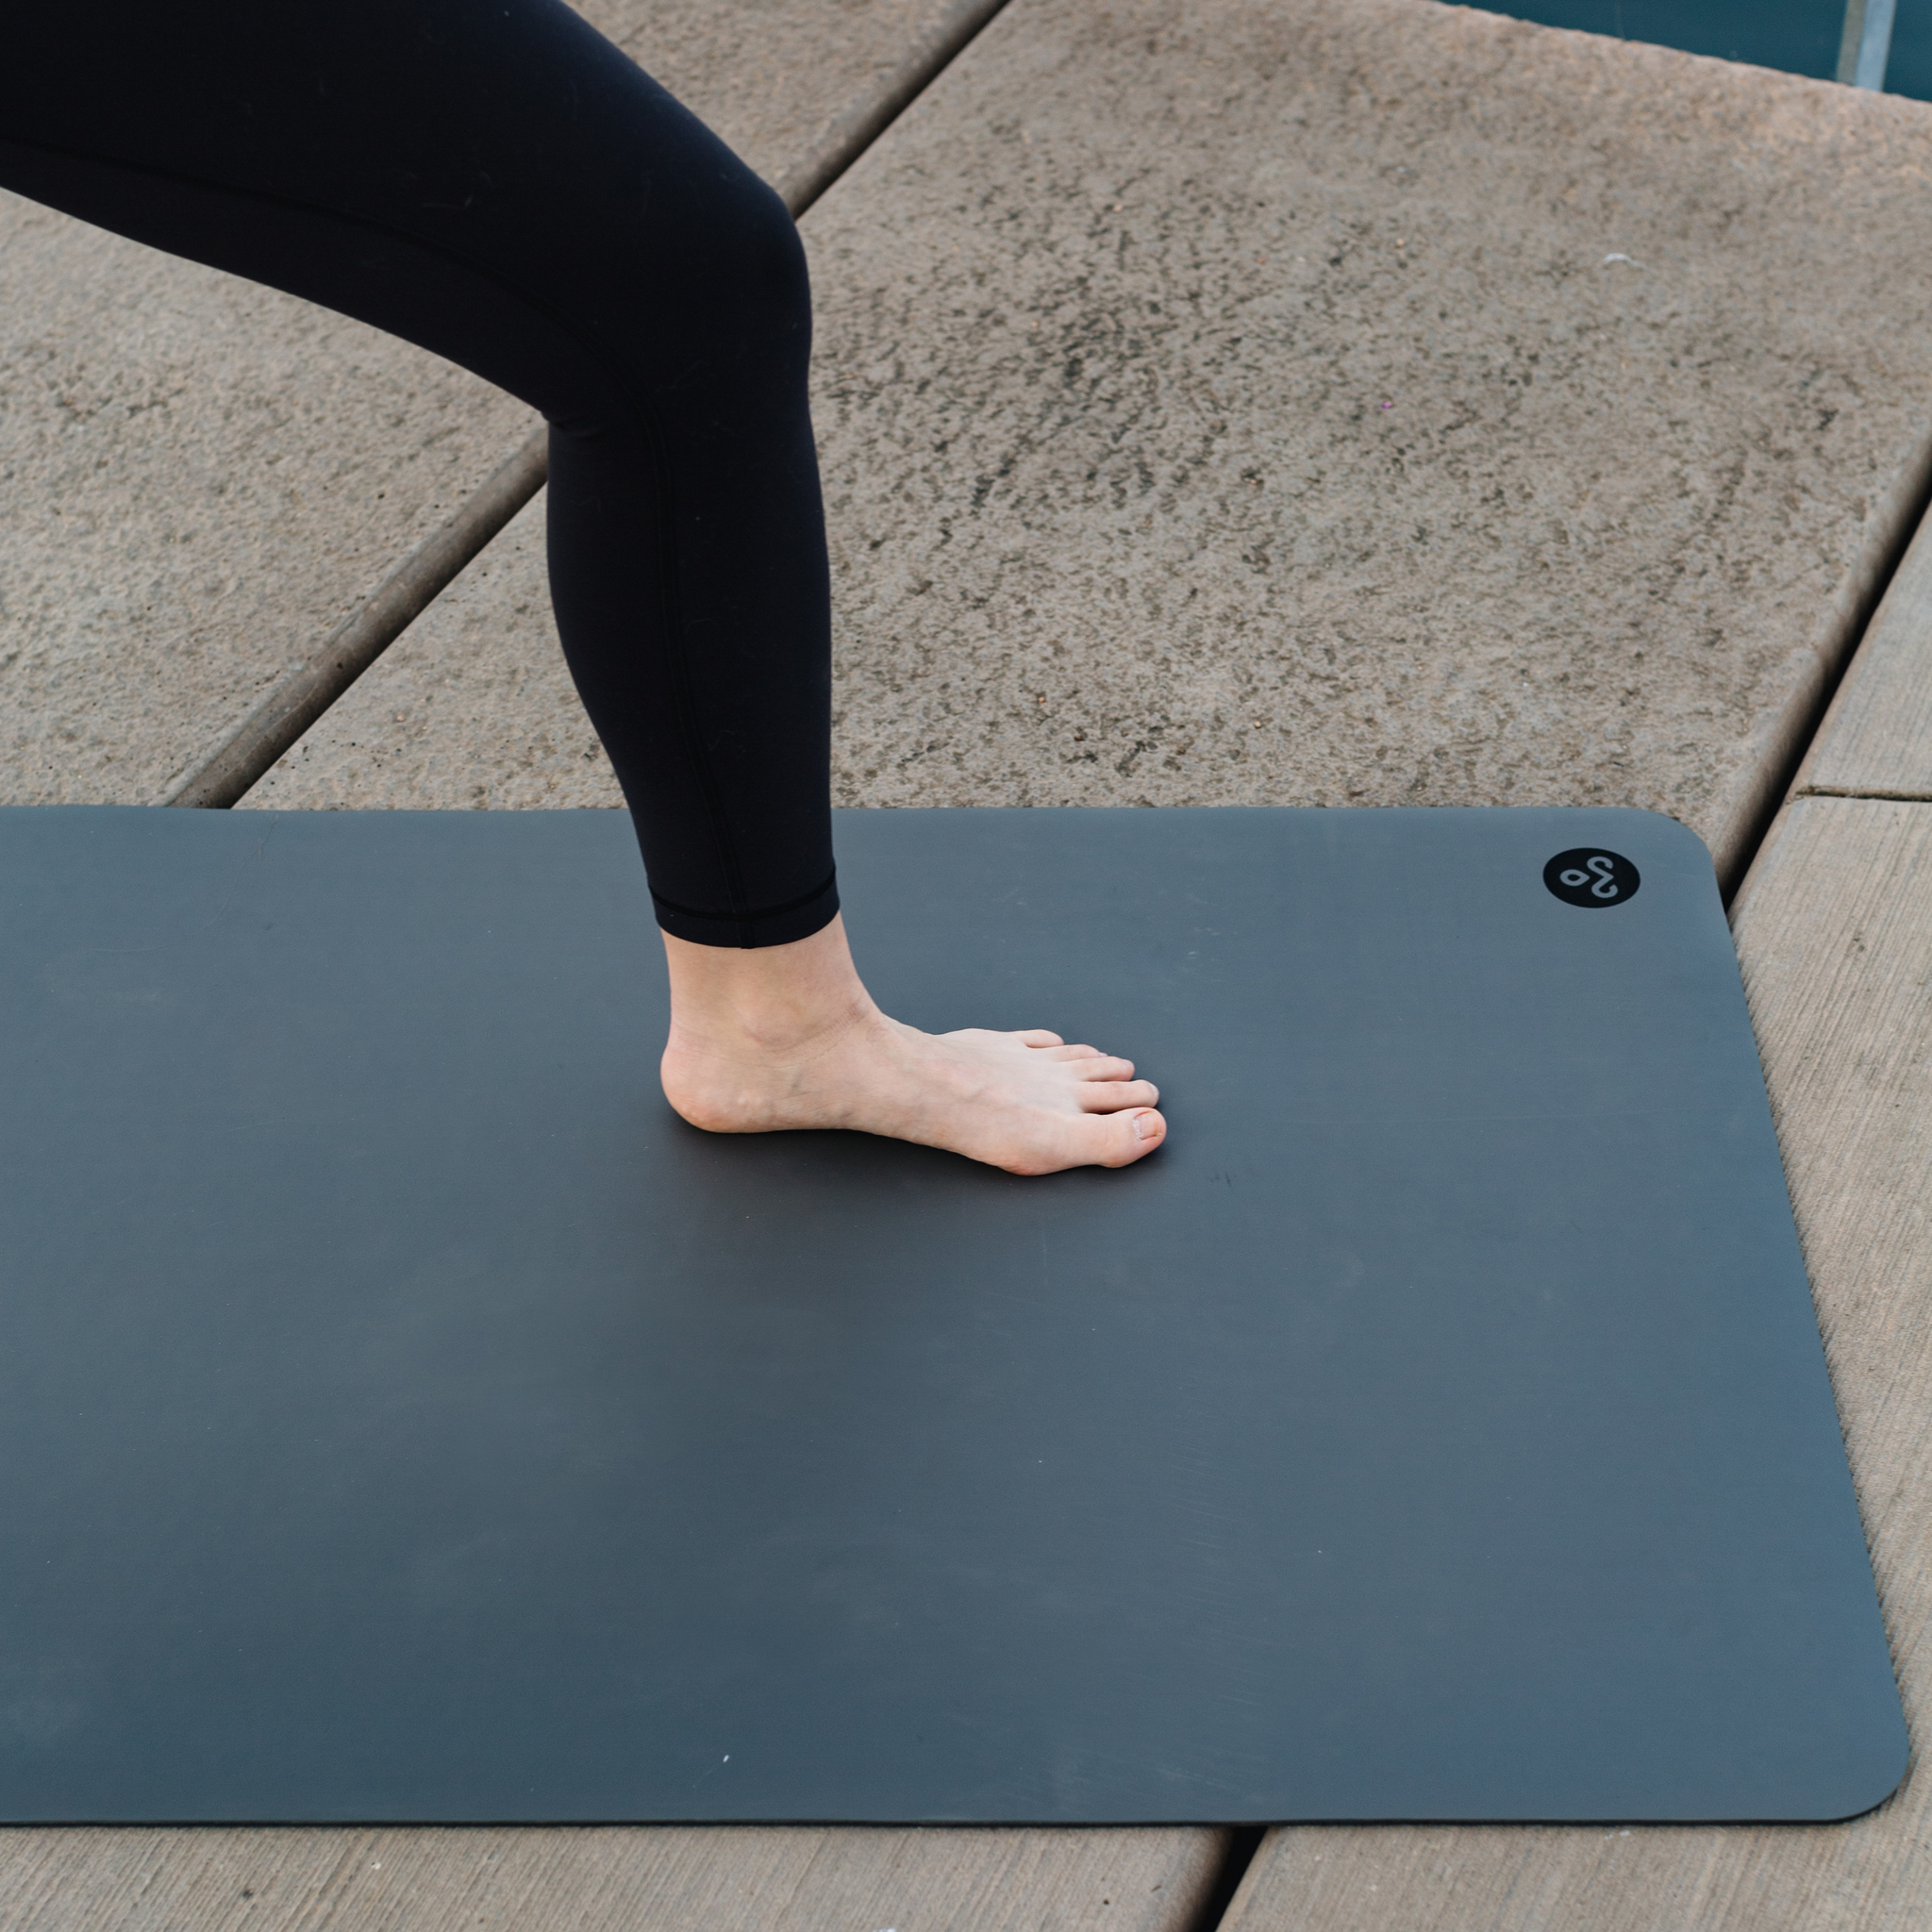 Product Review: lululemon Reversible 5mm mat — Empower Yoga